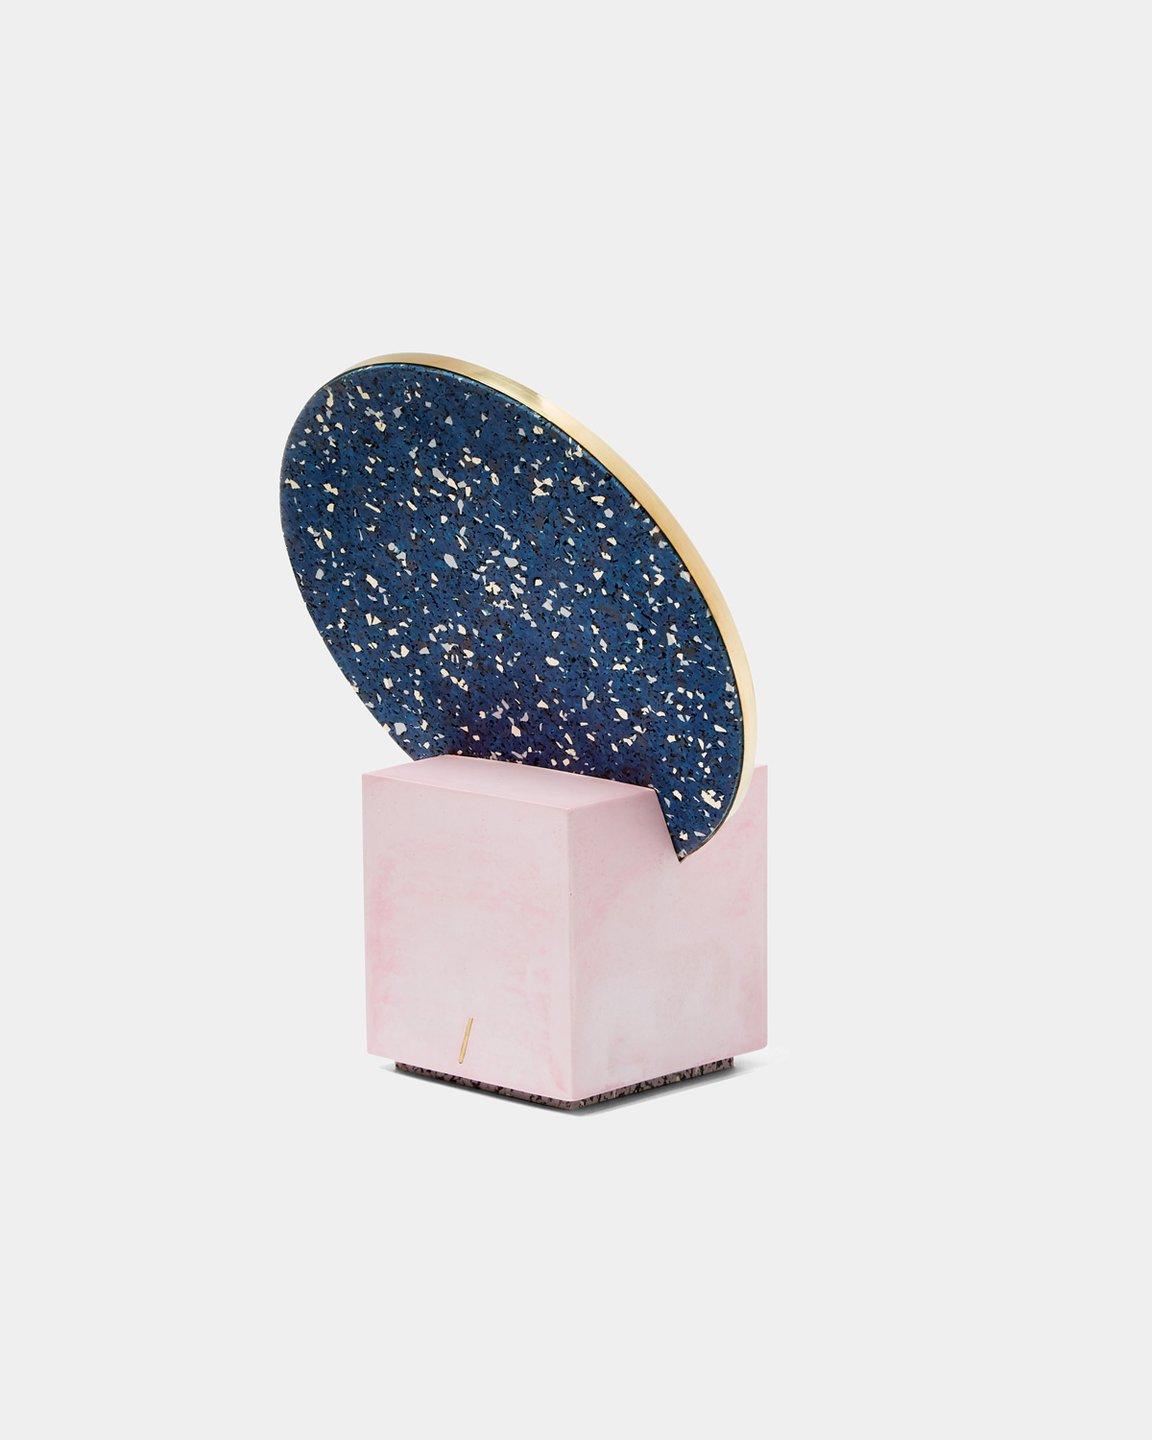 The Vanity Mirror consists of a hand-cast pink cube base with a removable round mirror, edged with a brass frame, and a speckled blue rubber backside. 

Circular mirror with brass edging intersects with the hand-cast cube, showcasing the